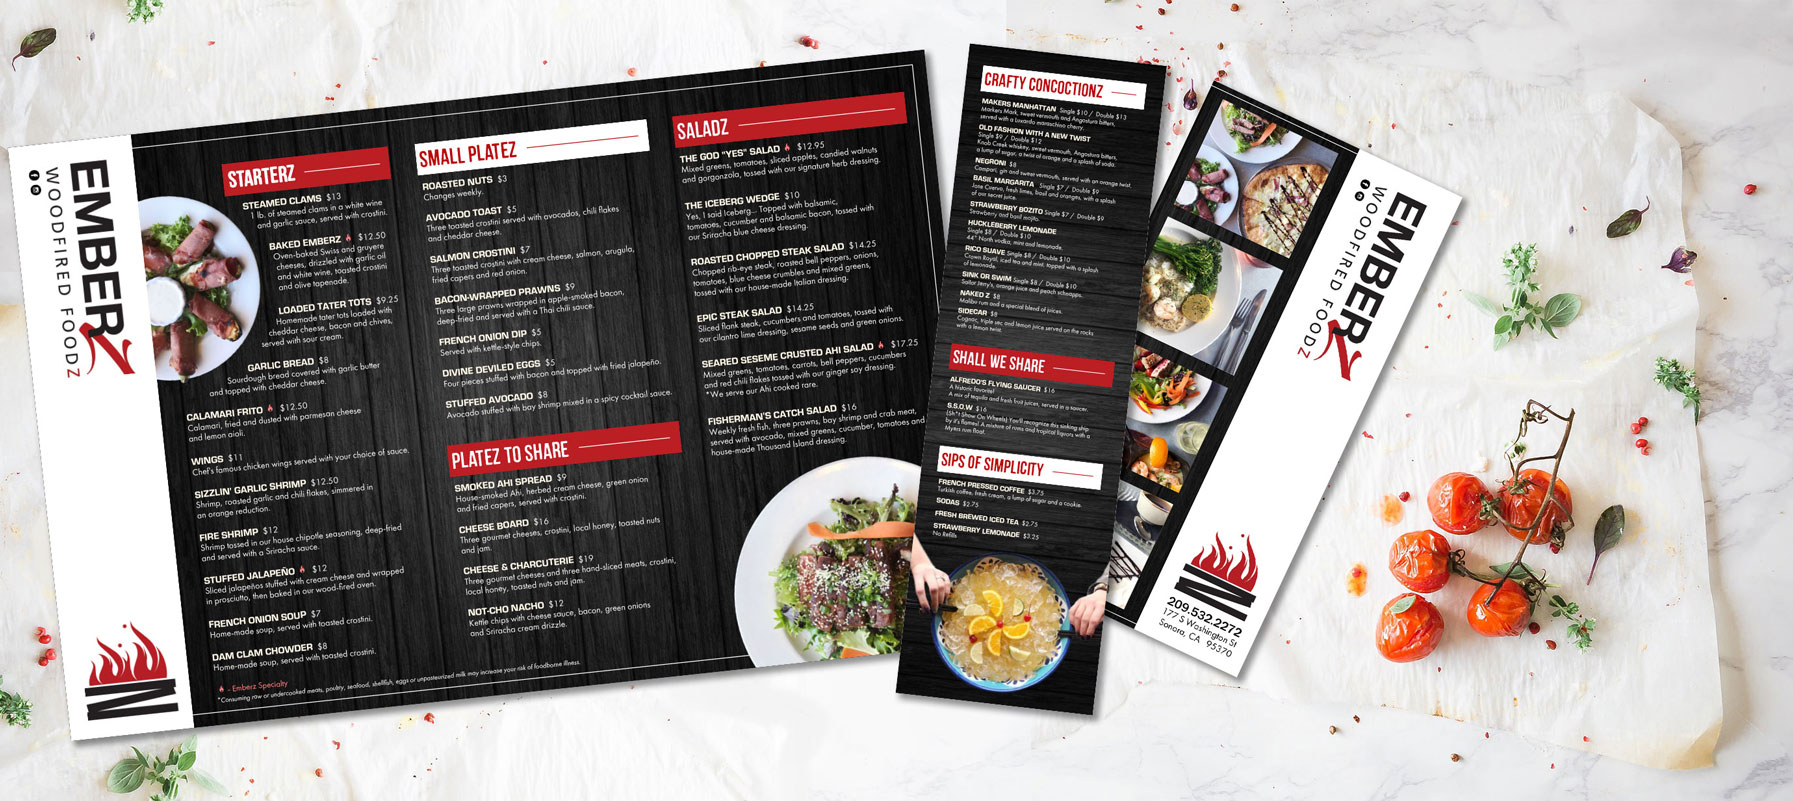 Graphic Design for takeout menus